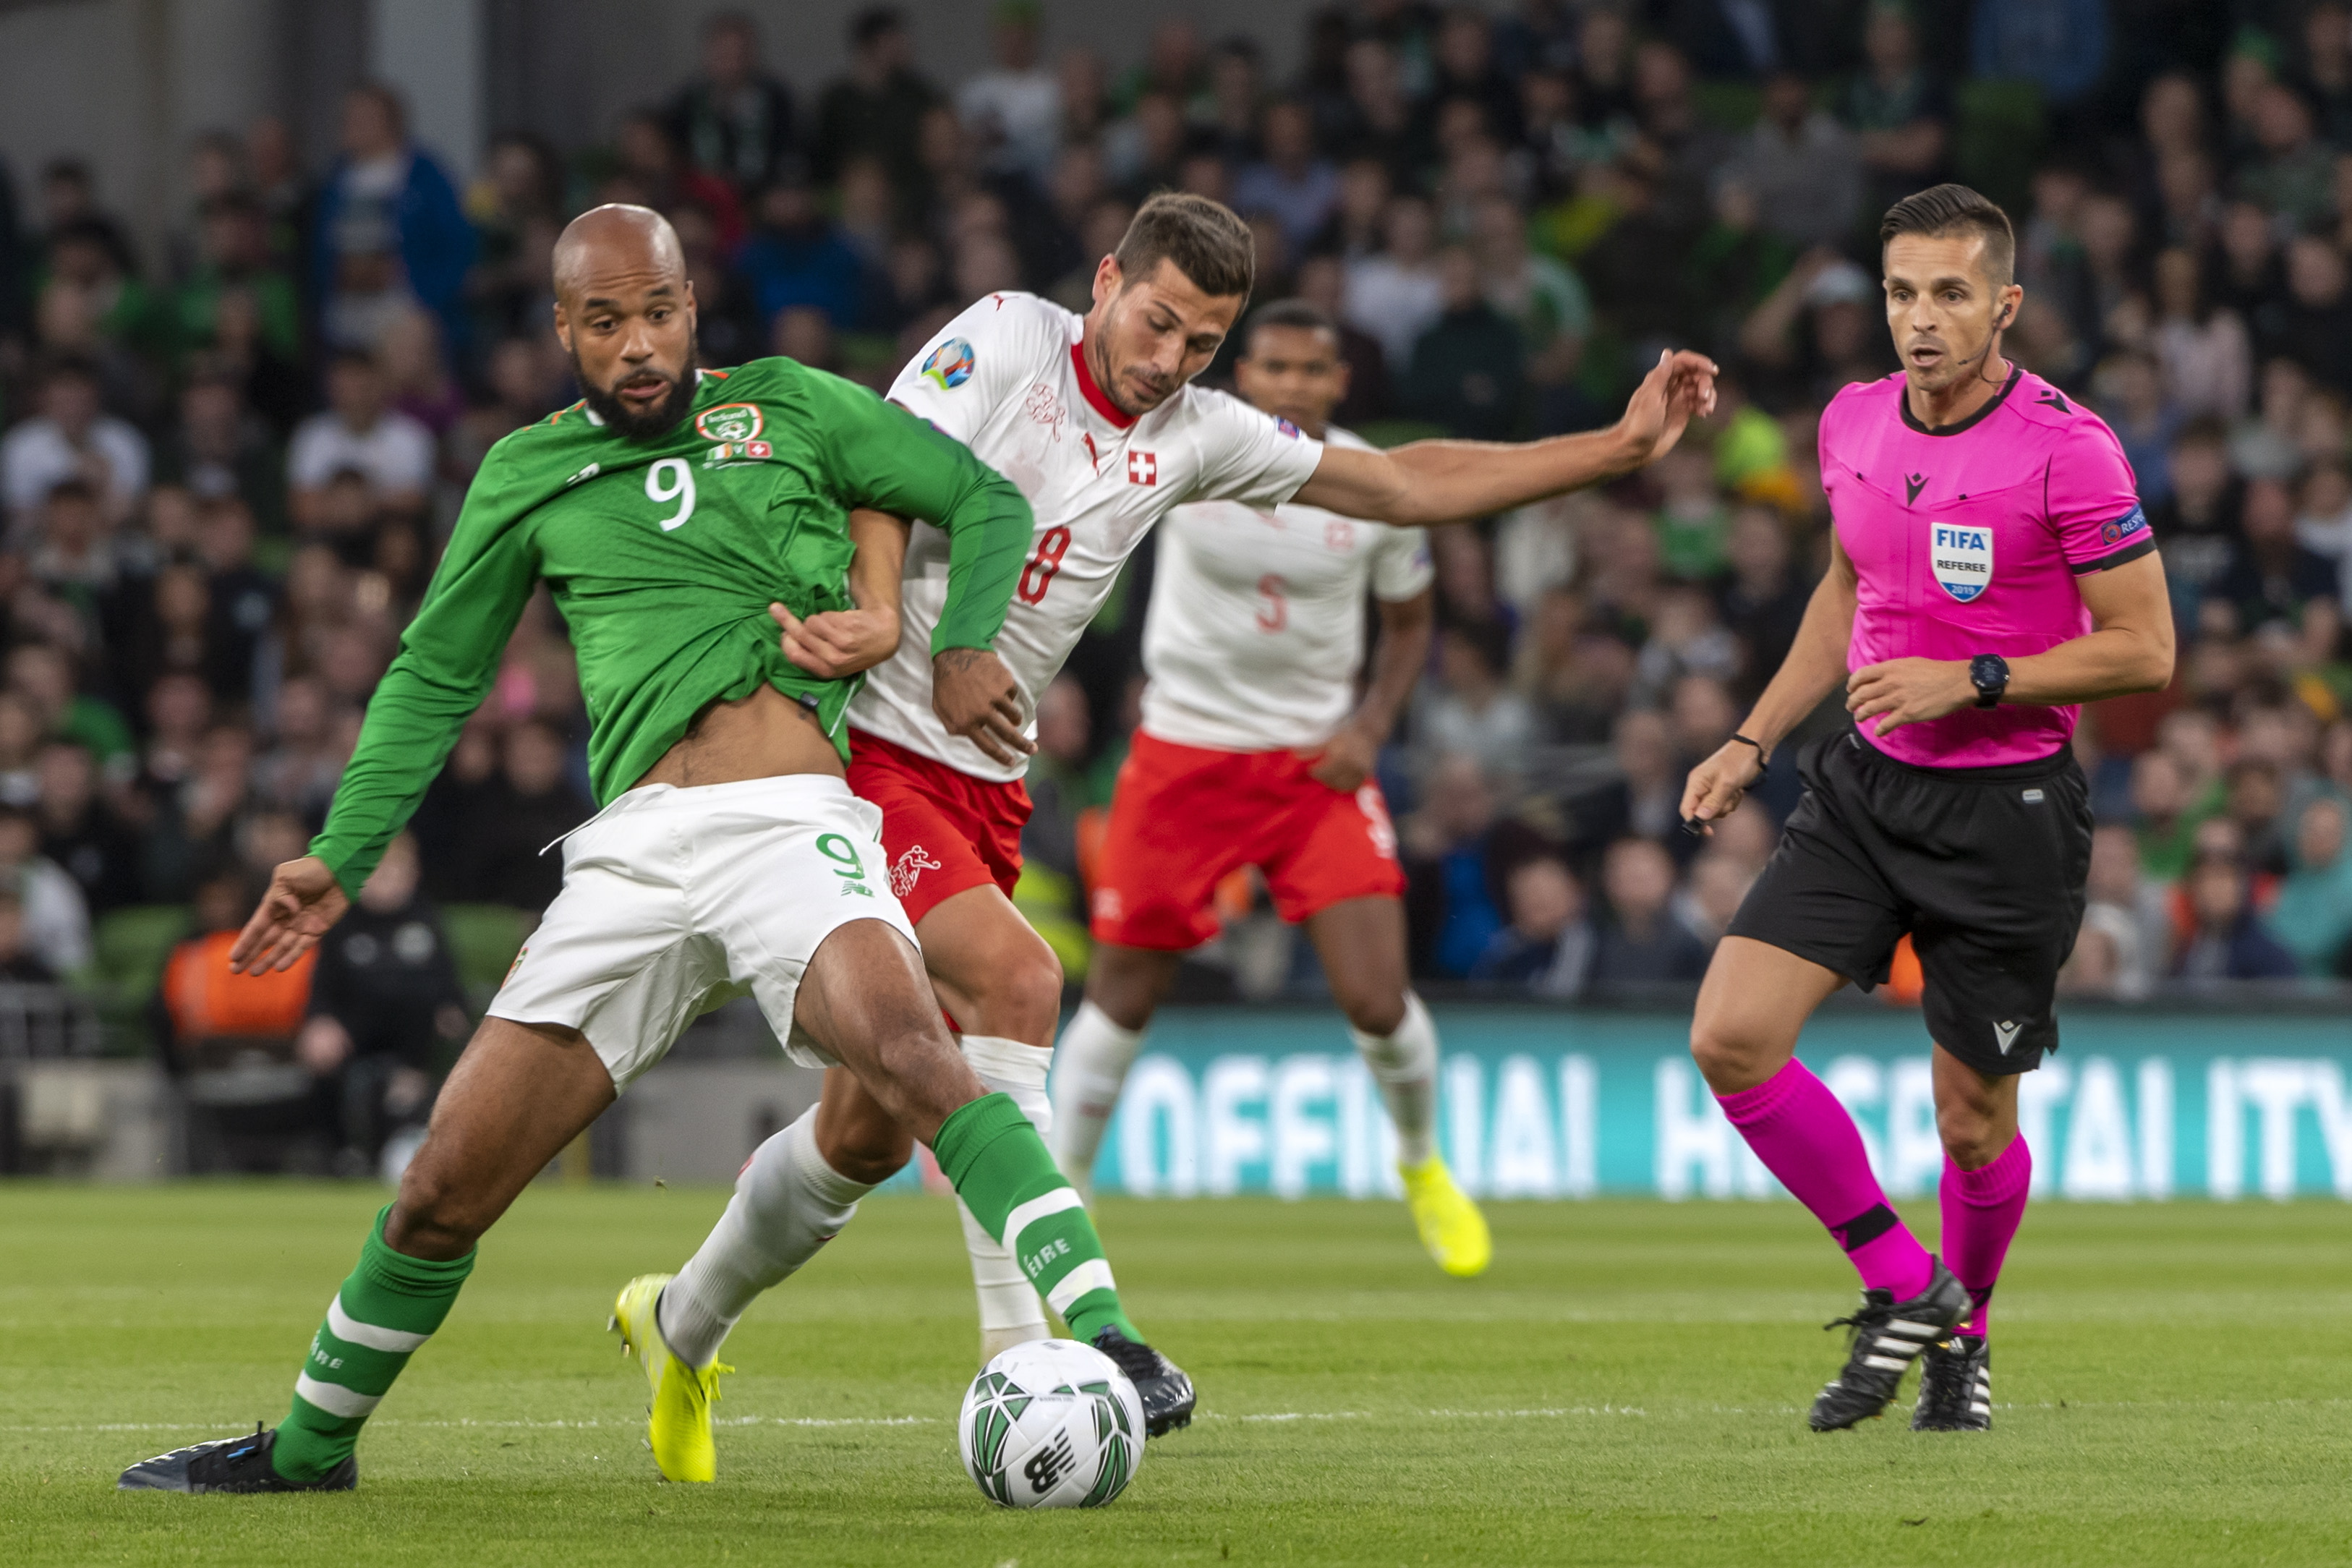 epa07820785 Ireland's David McGoldrick (L) fights for the ball against Switzerland's Remo Freuler during the UEFA Euro 2020 qualifying Group D soccer match between Ireland and Switzerland at the Aviva stadium in Dublin, Ireland, 05 September 2019.  EPA/GEORGIOS KEFALAS